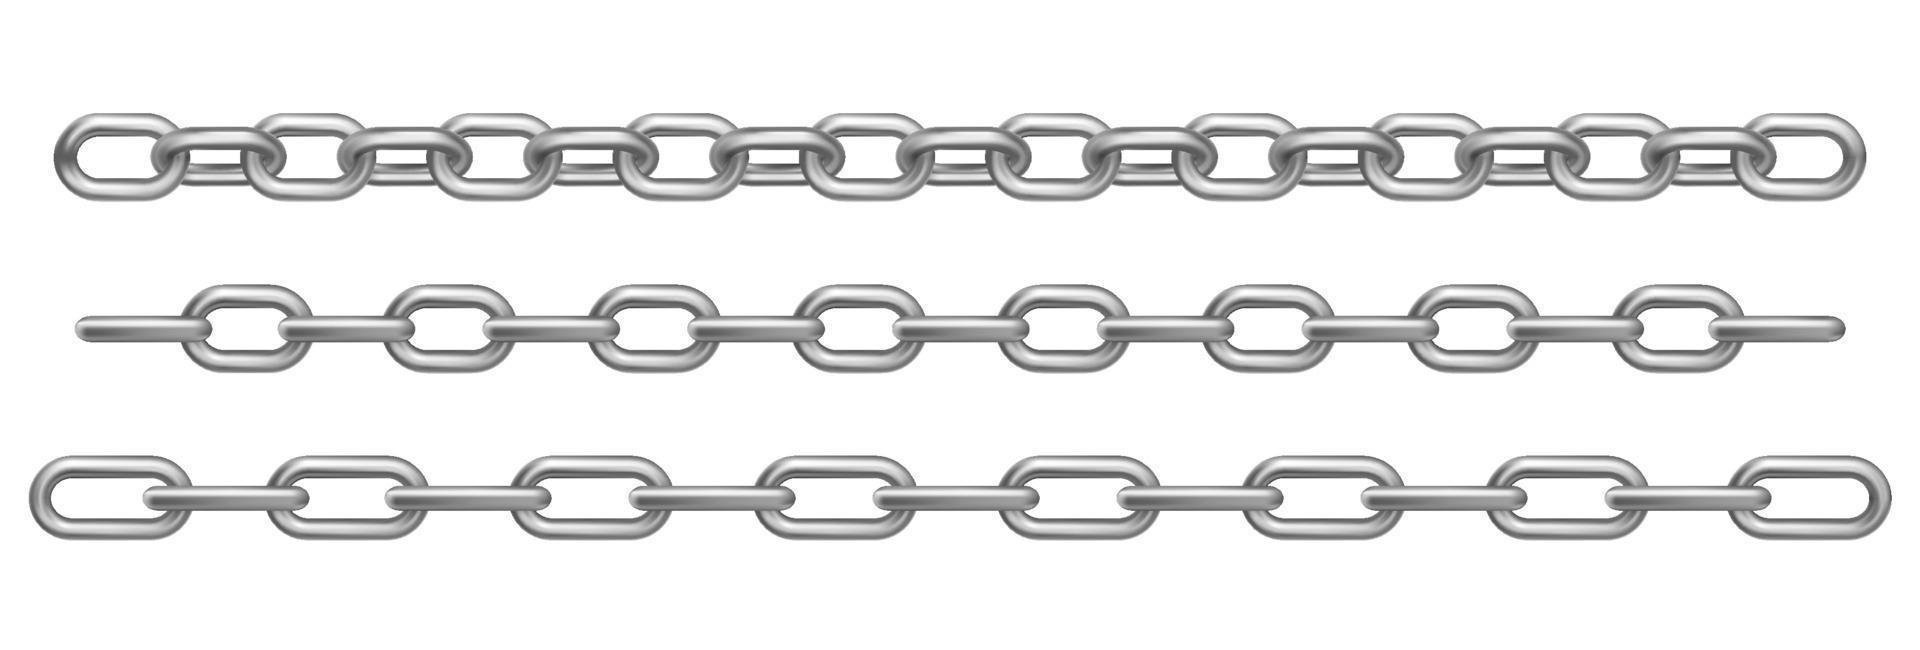 Vector realistic chrome metal chains